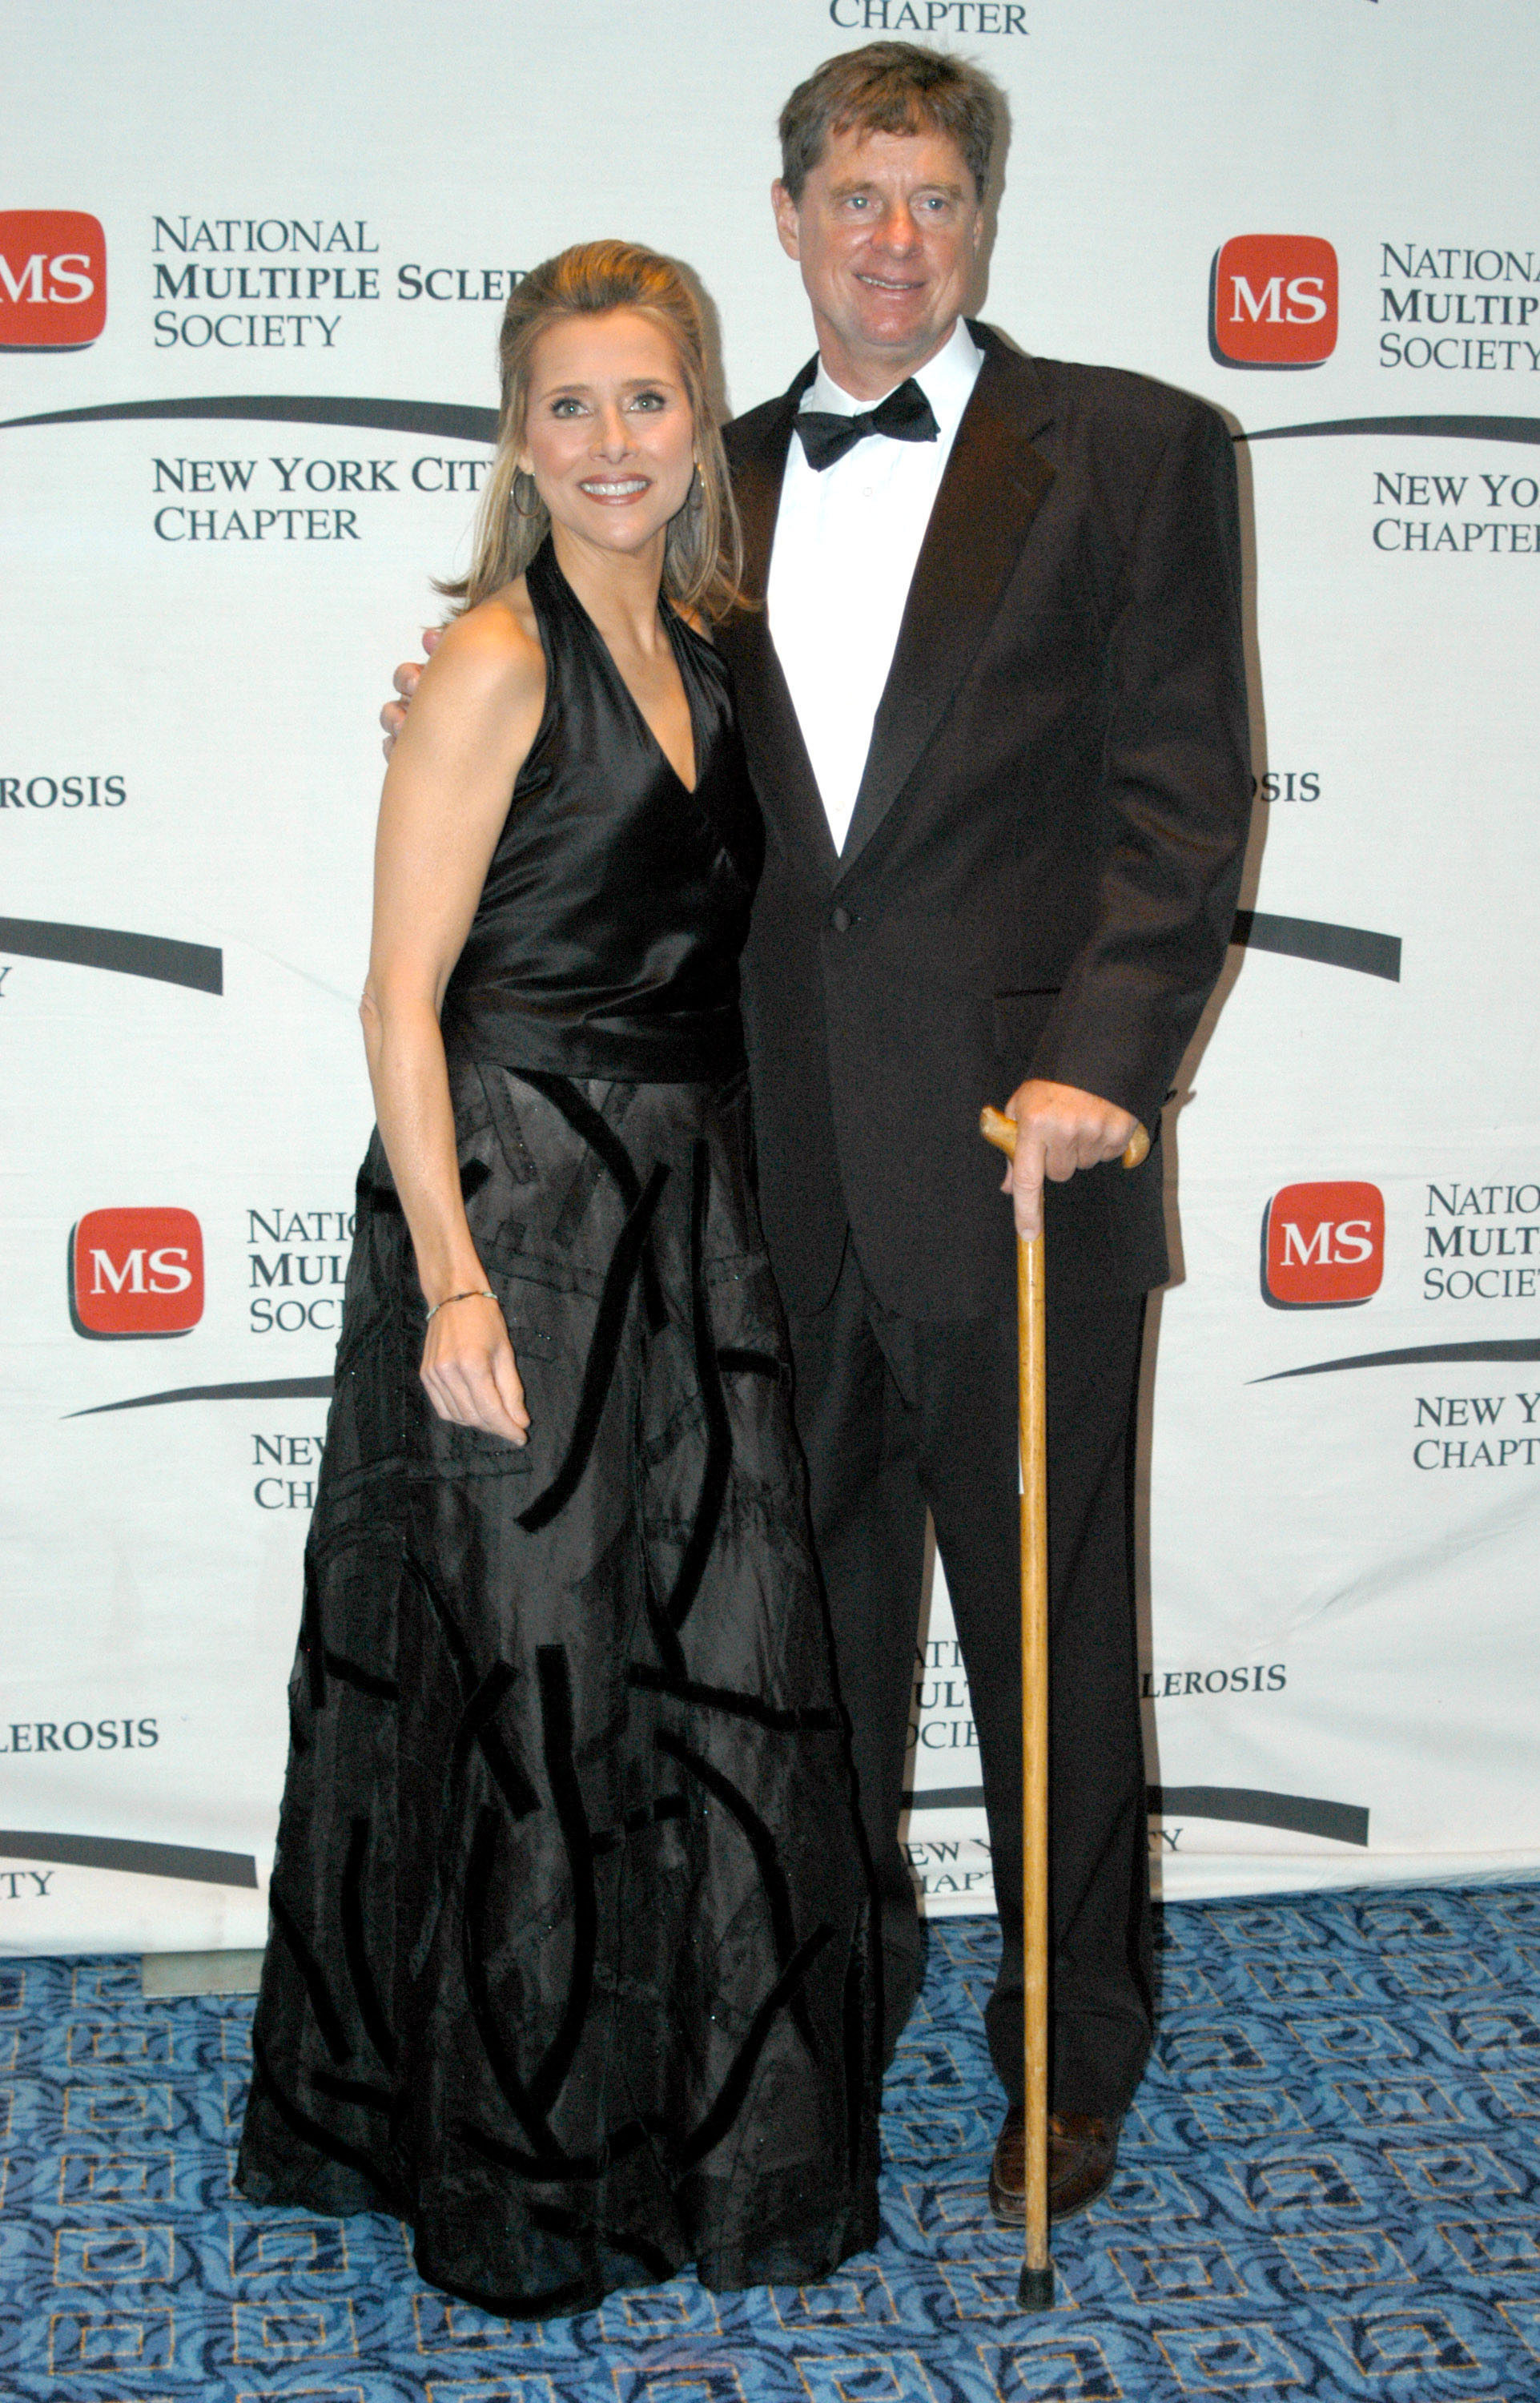 Meredith Vieira and Richard Cohen during the New York City Chapter of the National Multiple Sclerosis Society 27th Dinner of Champions Honors Teri Garr in New York City on October 15, 2003. | Source: Getty Images